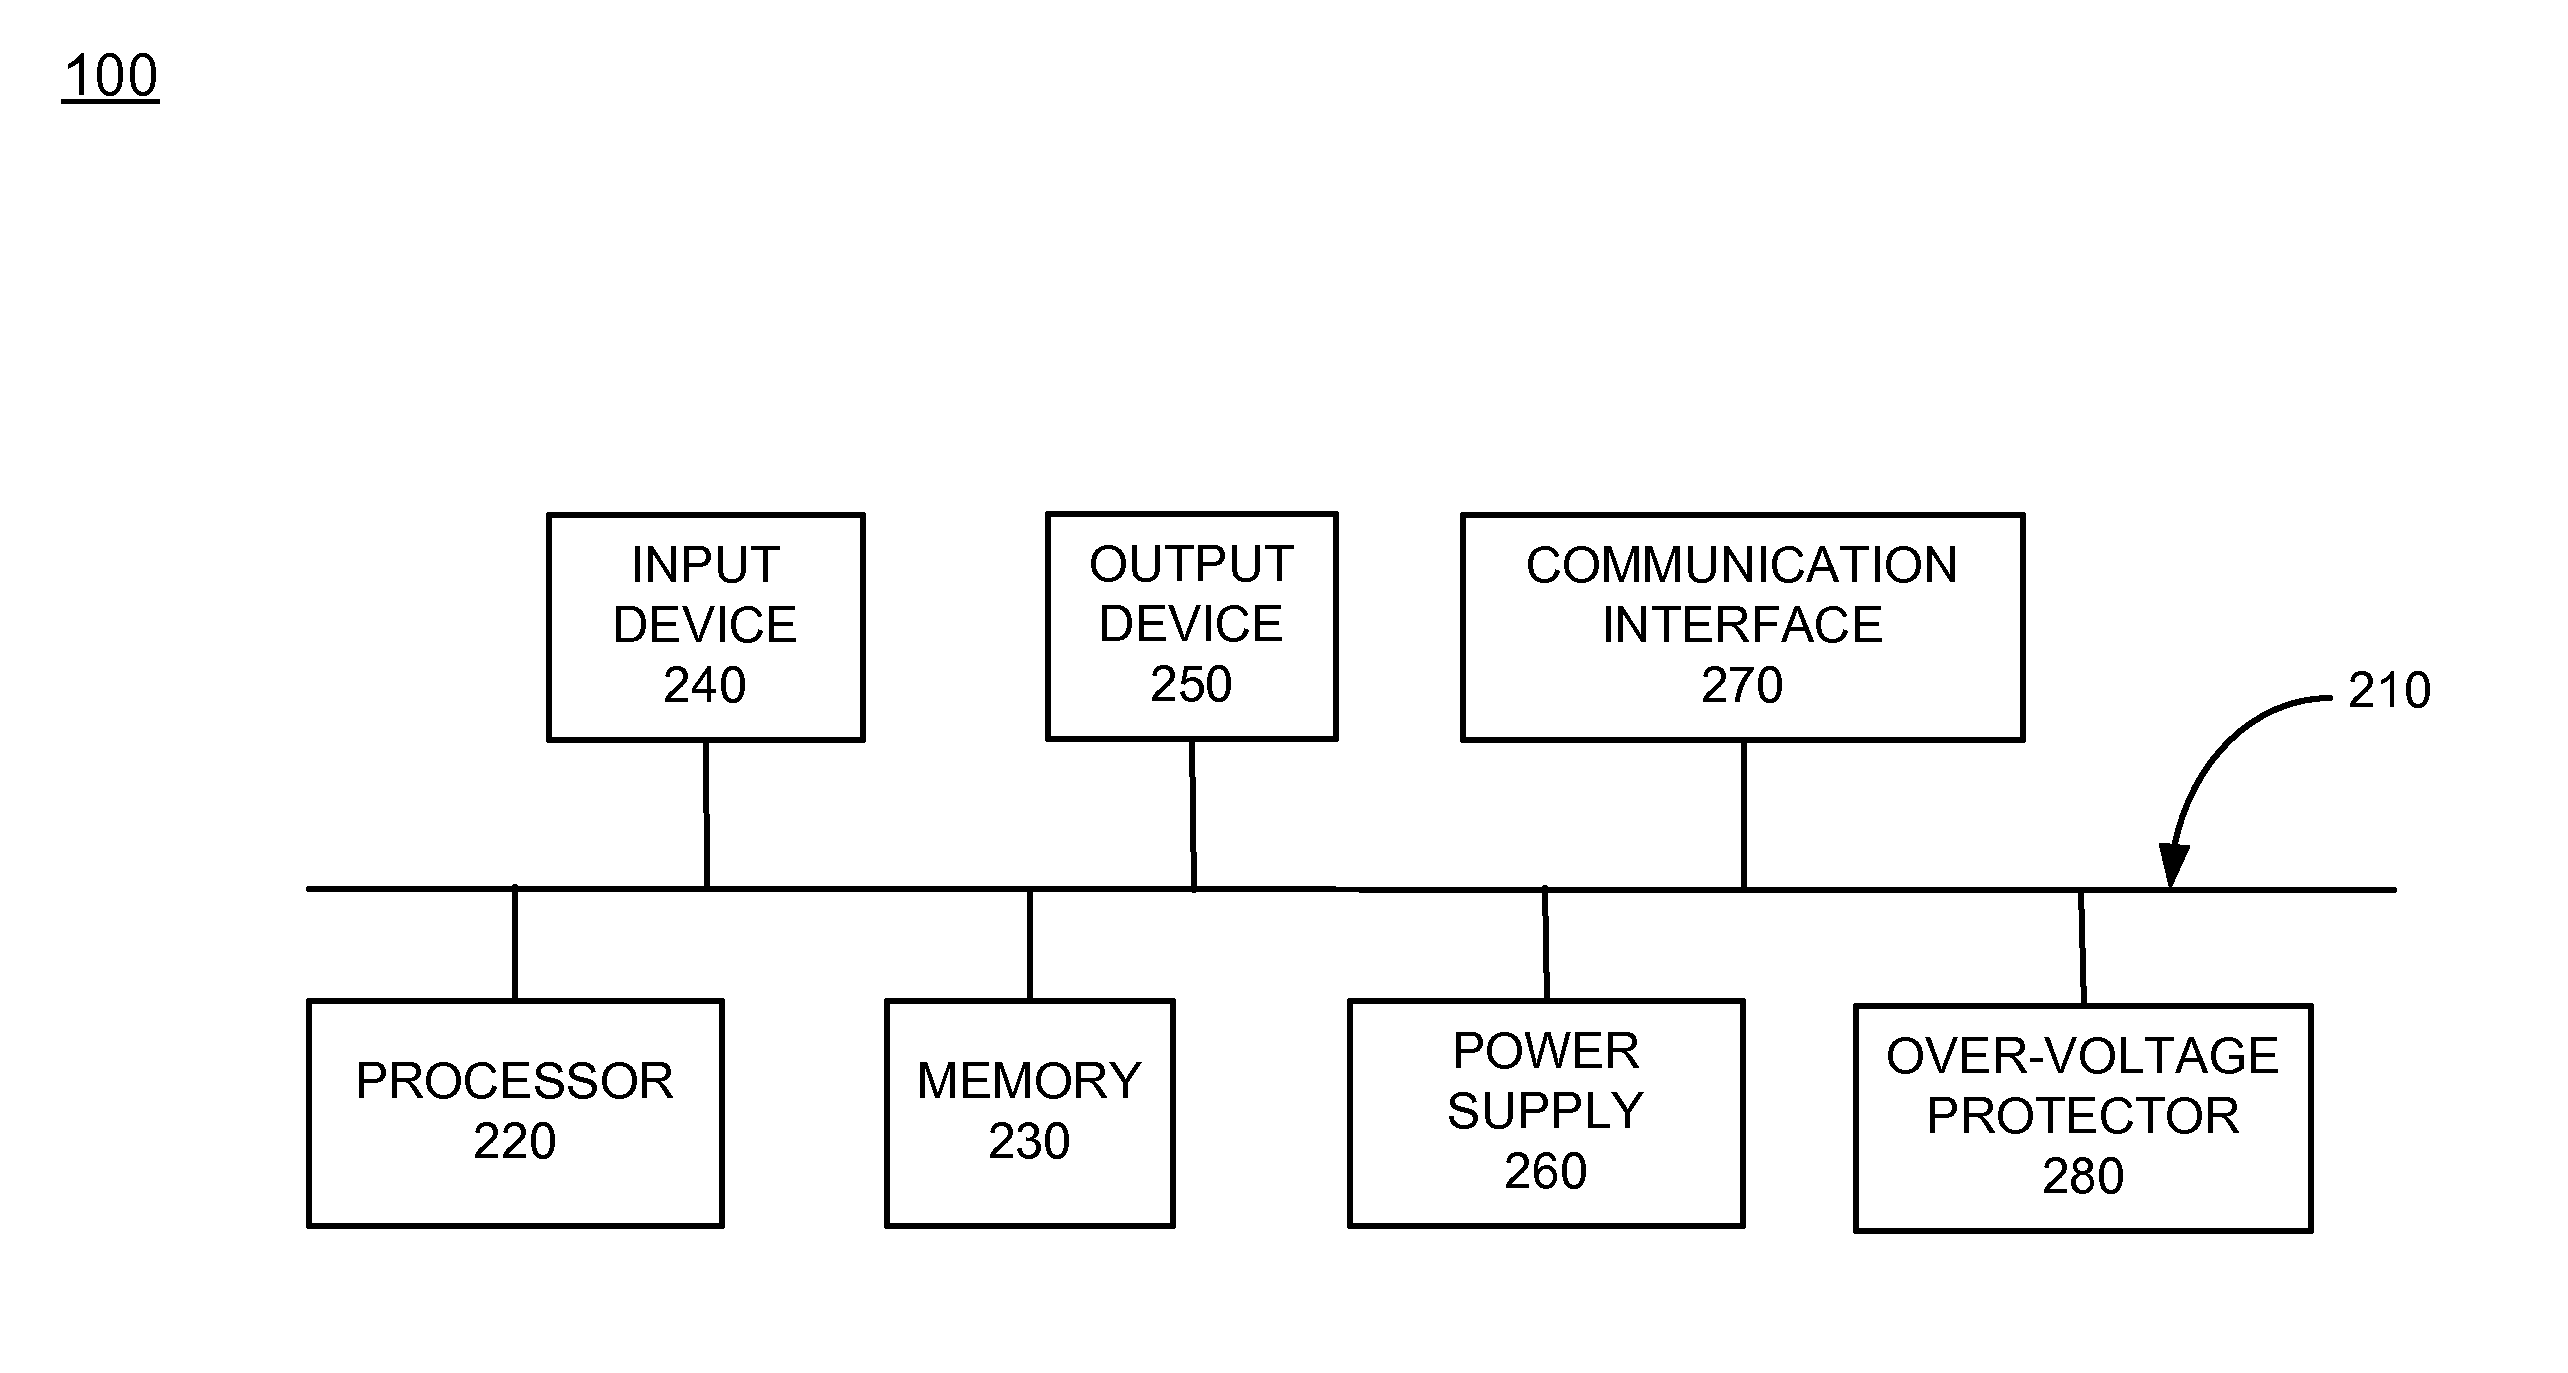 Over-voltage protection